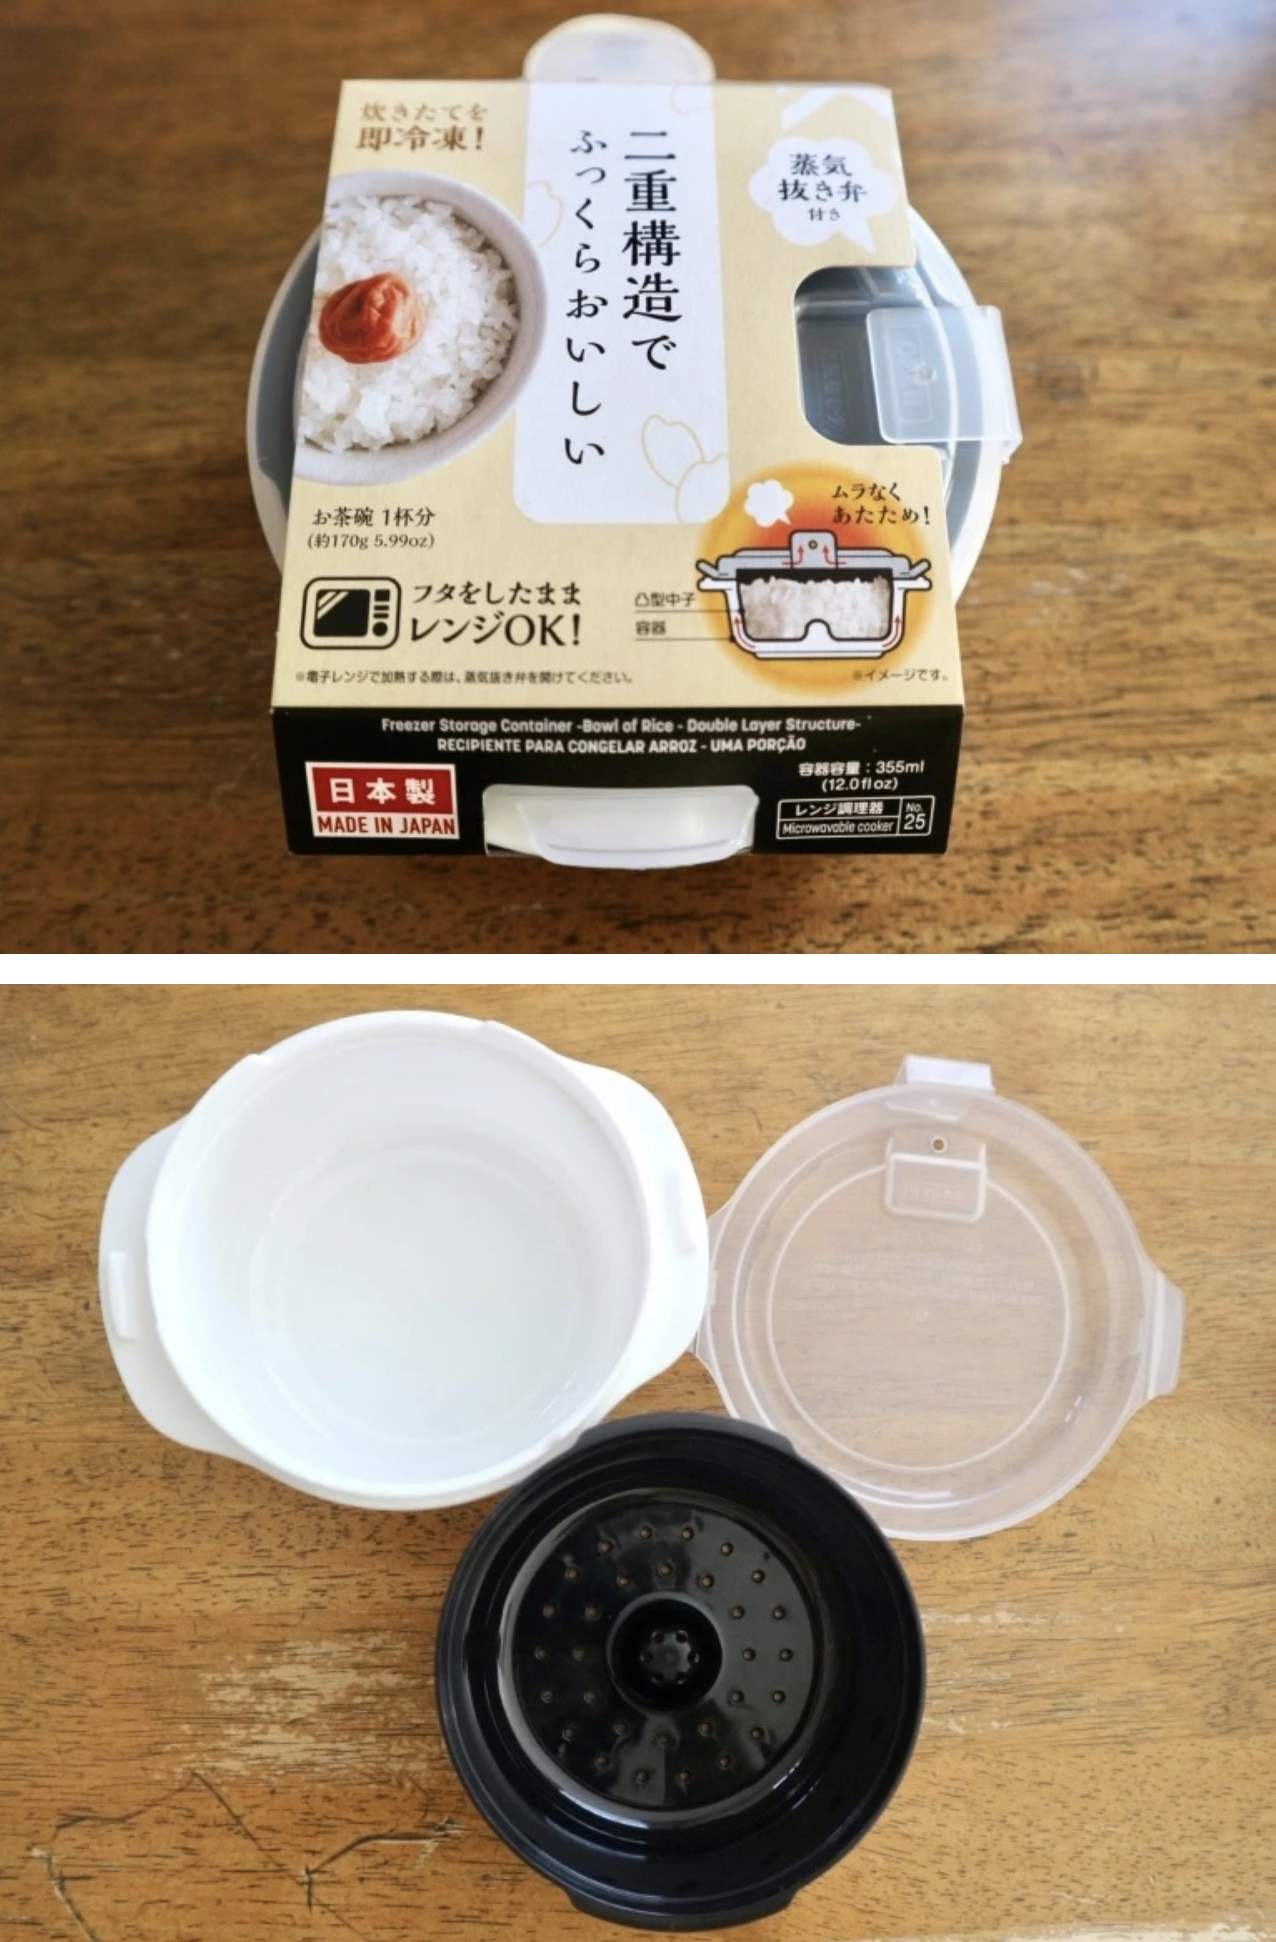 We test Daiso's new storage container to see if it keeps rice fluffy even  after freezing